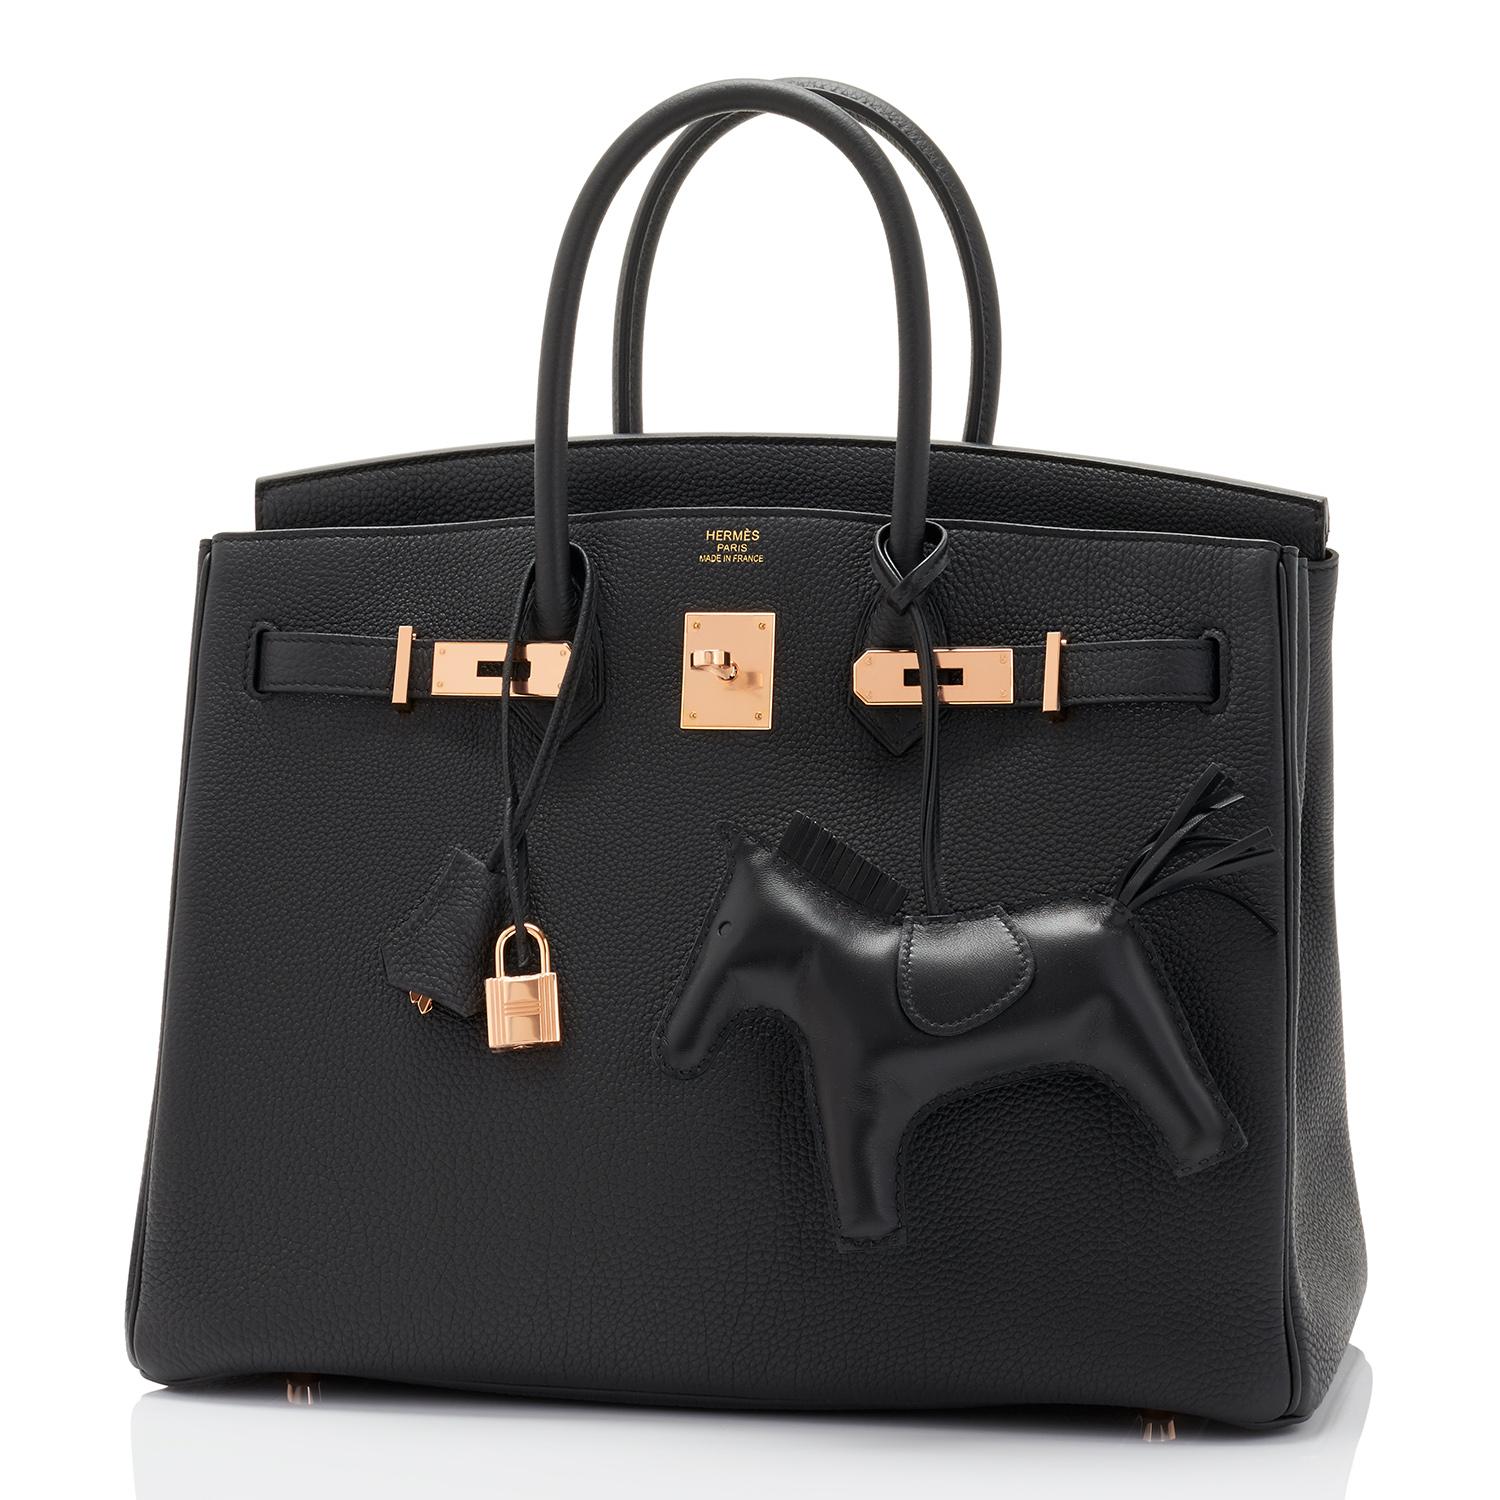 Hermes Black Togo 35cm Birkin Rose Gold Hardware Power Birkin Y Stamp 2020
Brand New in Box. Store fresh. Pristine Condition (with plastic on hardware). 
Just purchased from Hermes store; bag bears new 2020 interior Y stamp.
Perfect gift! Comes with